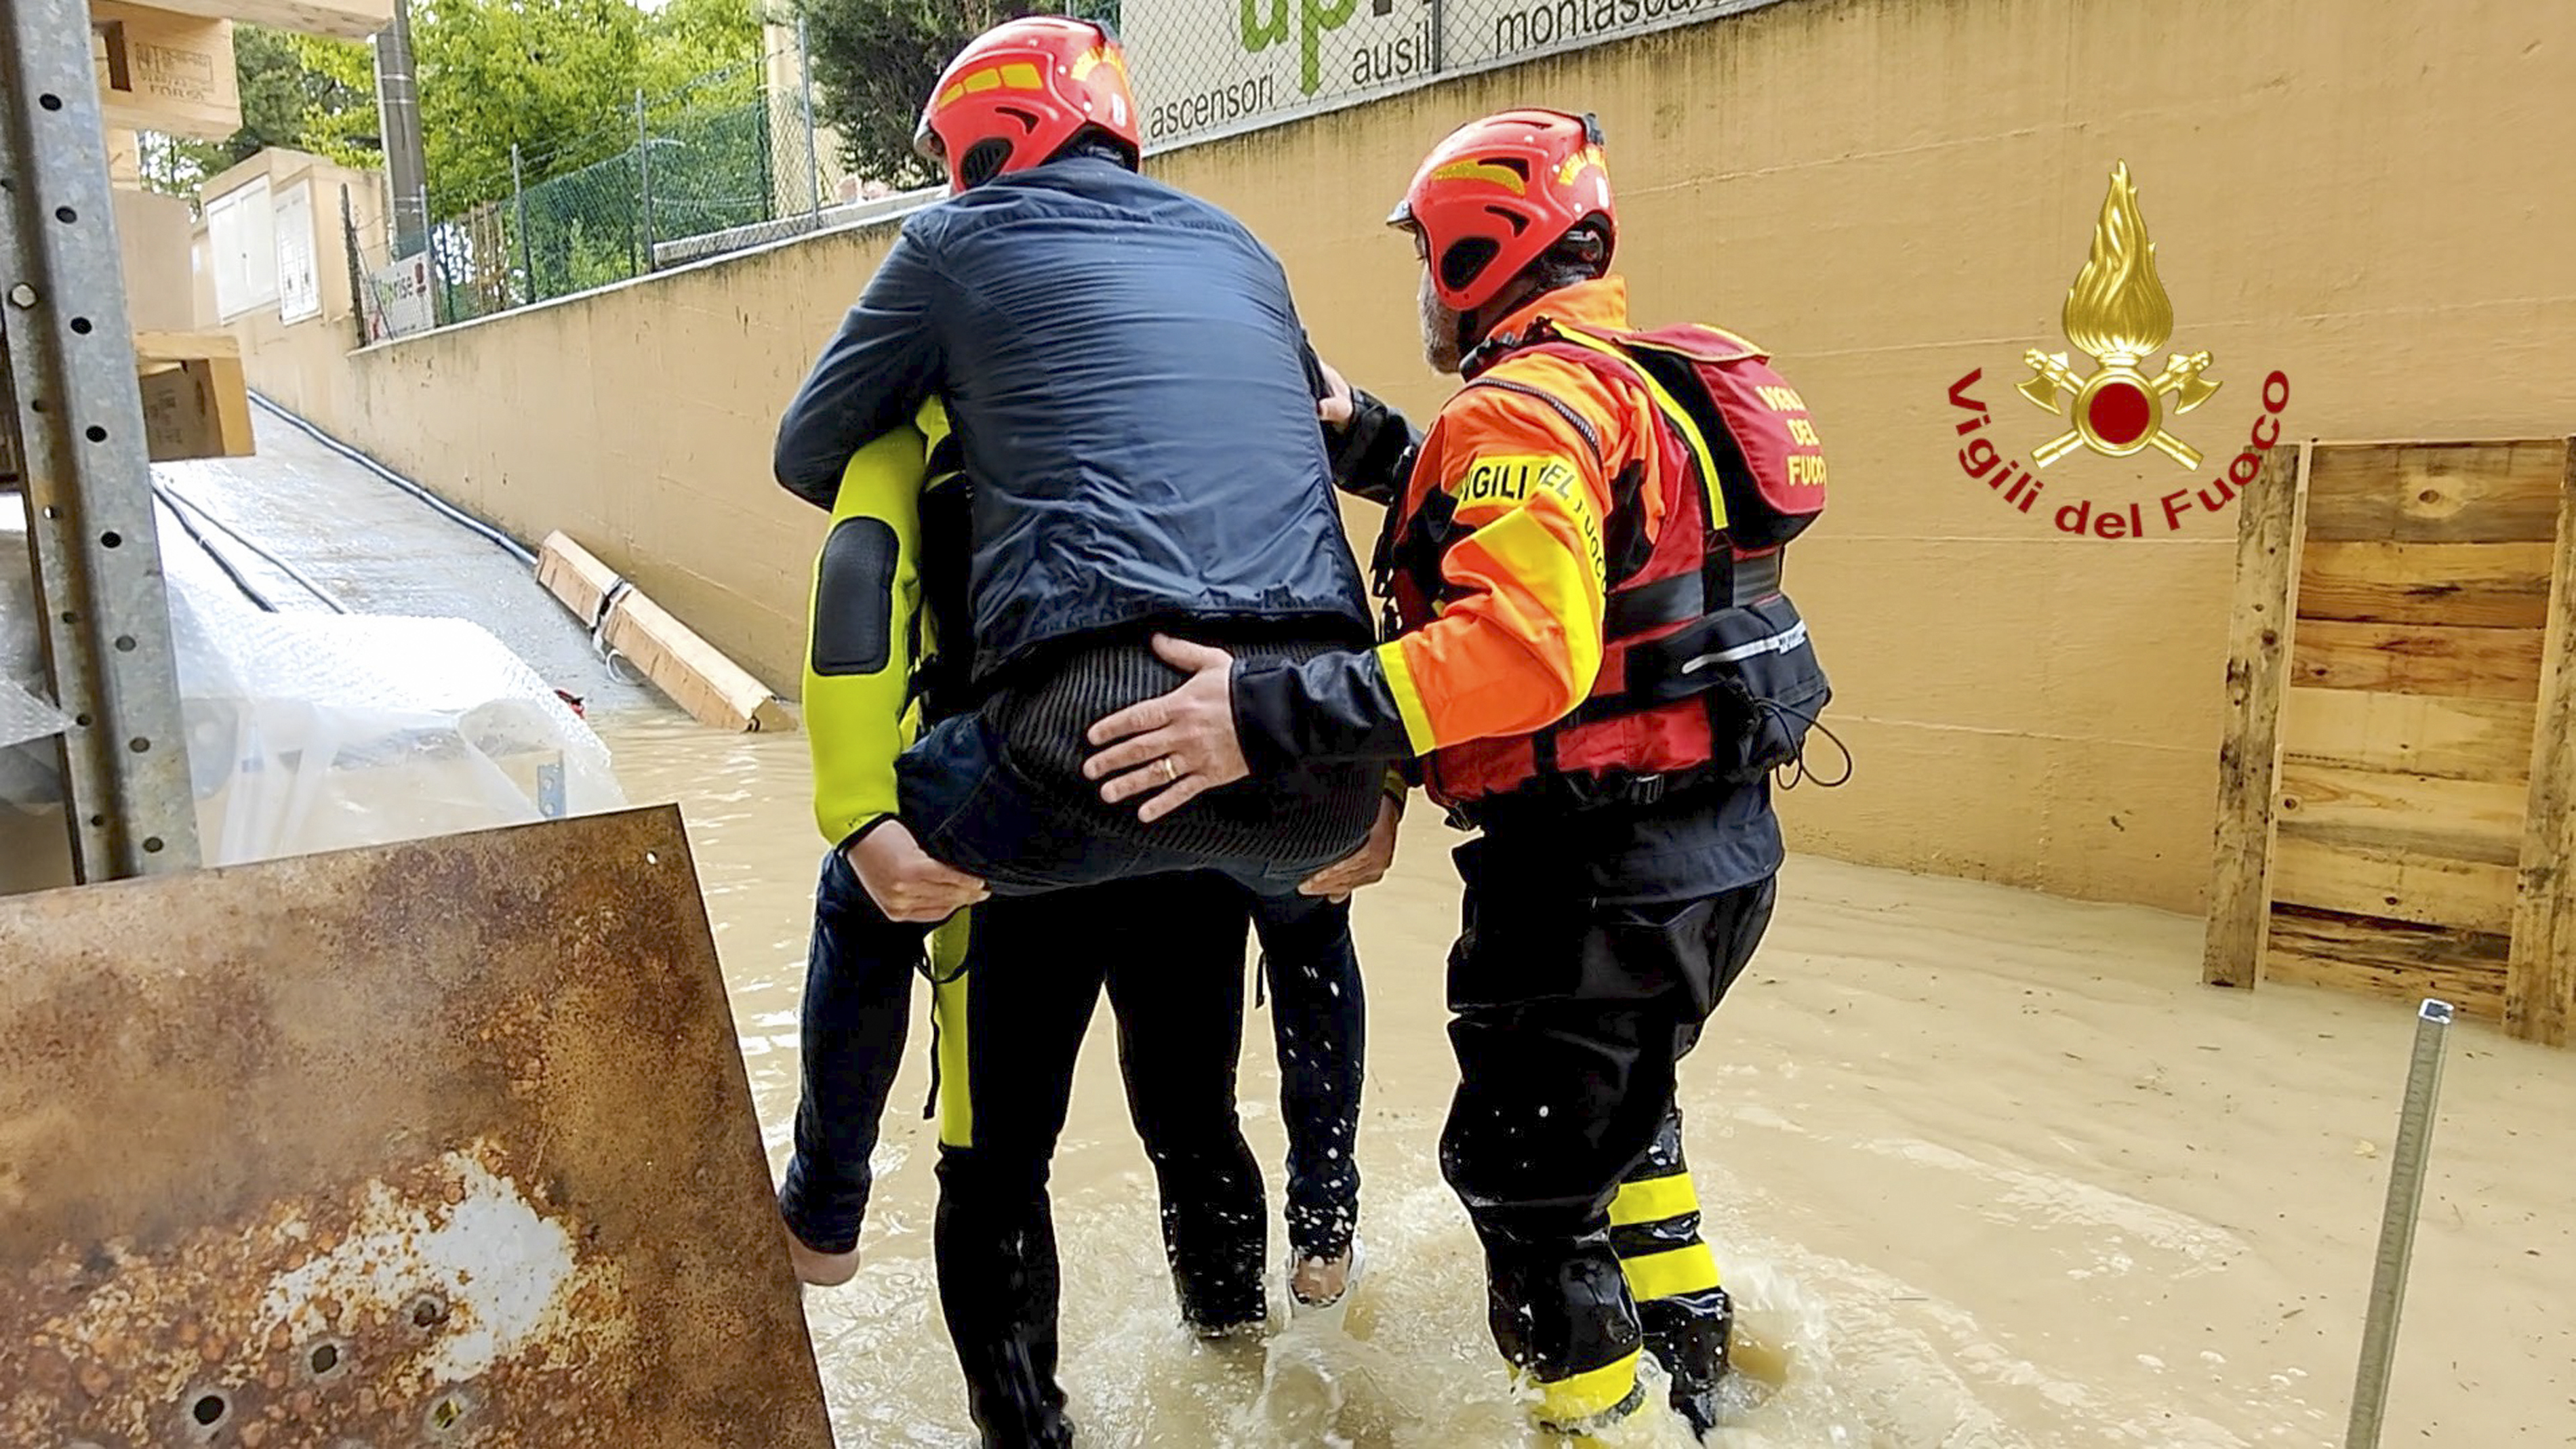 Italian Firefighters rescue a person from a flooded house in Riccione, in the northern Italian region of Emilia Romagna, Tuesday, May 16, 2023.  